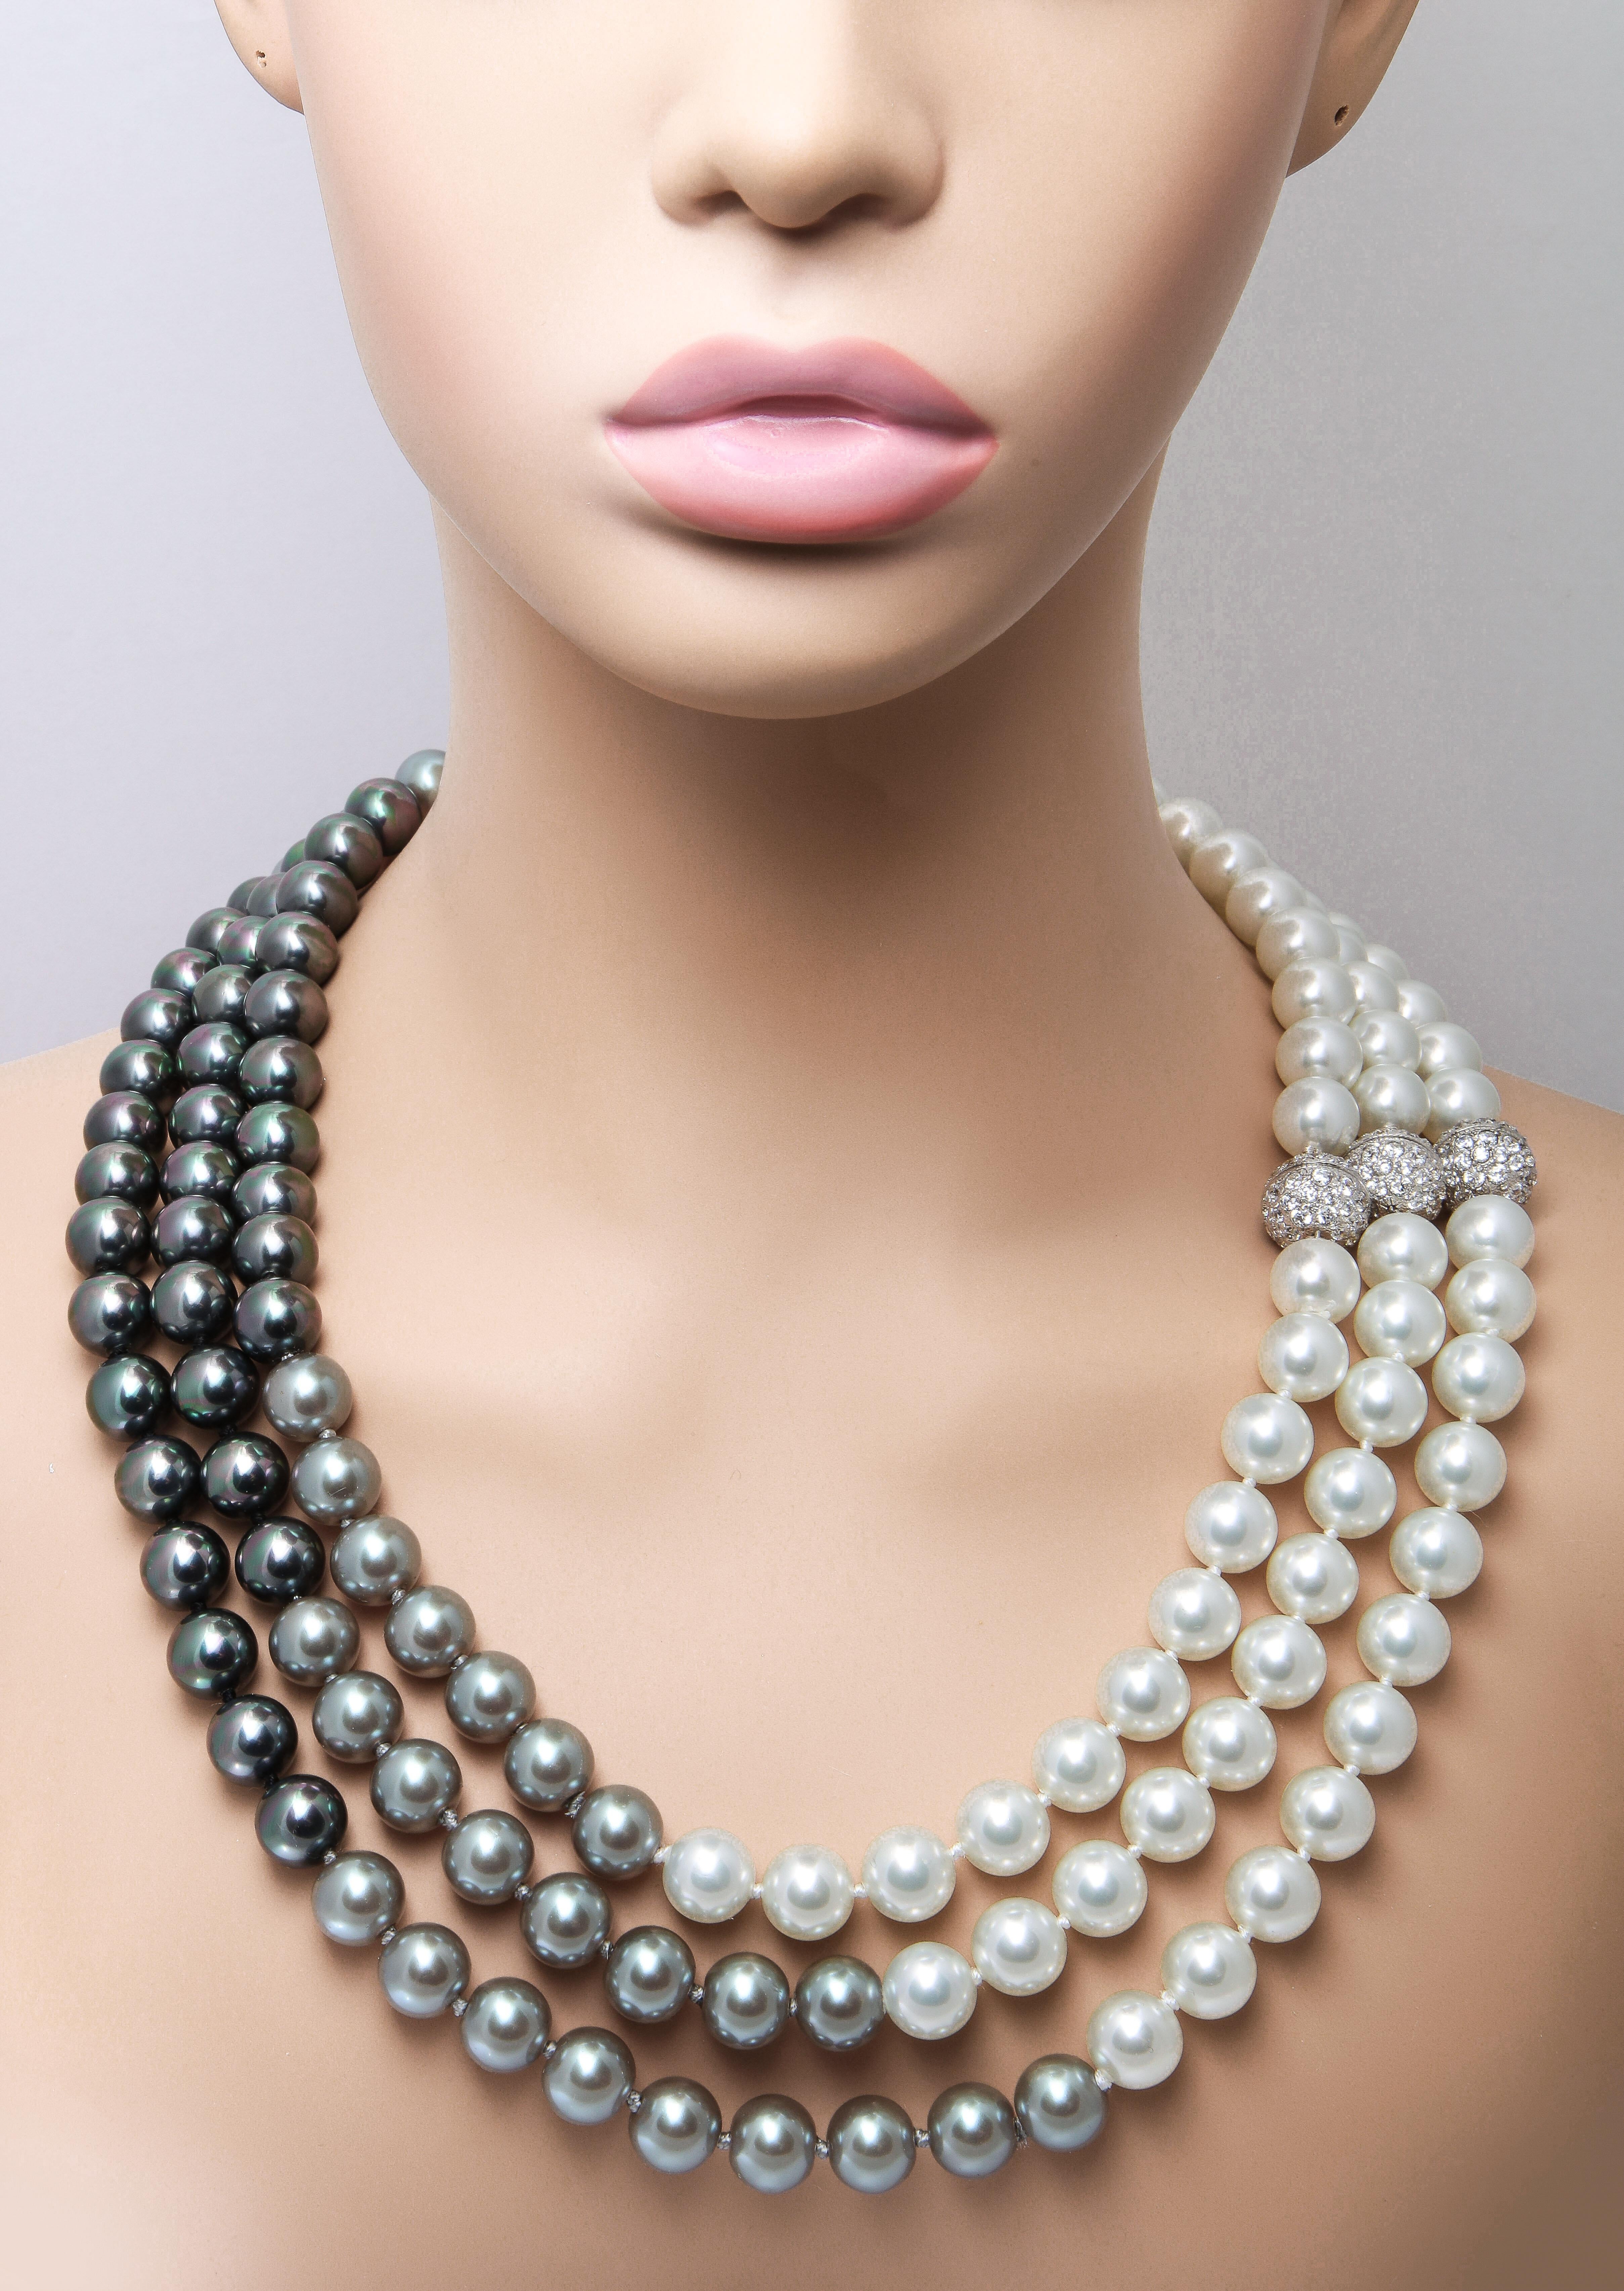  Shaded South Sea Manmade Pearls  Separable Three Necklaces Mikimoto Style 2